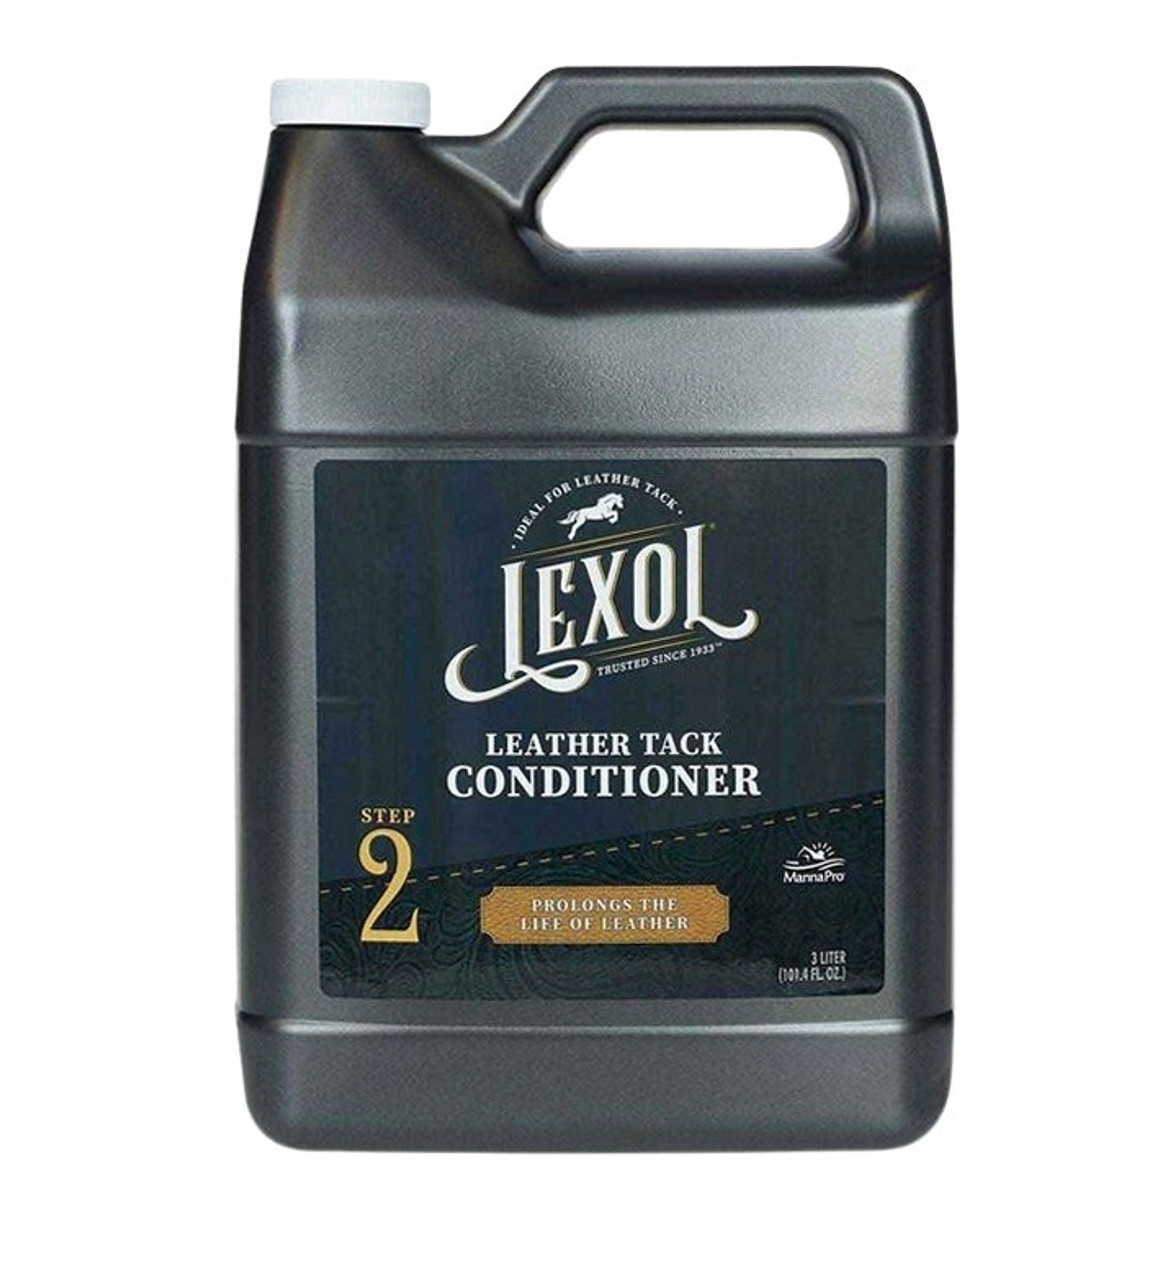 Lexol Leather Tack Conditioner Step 2- Tack Care